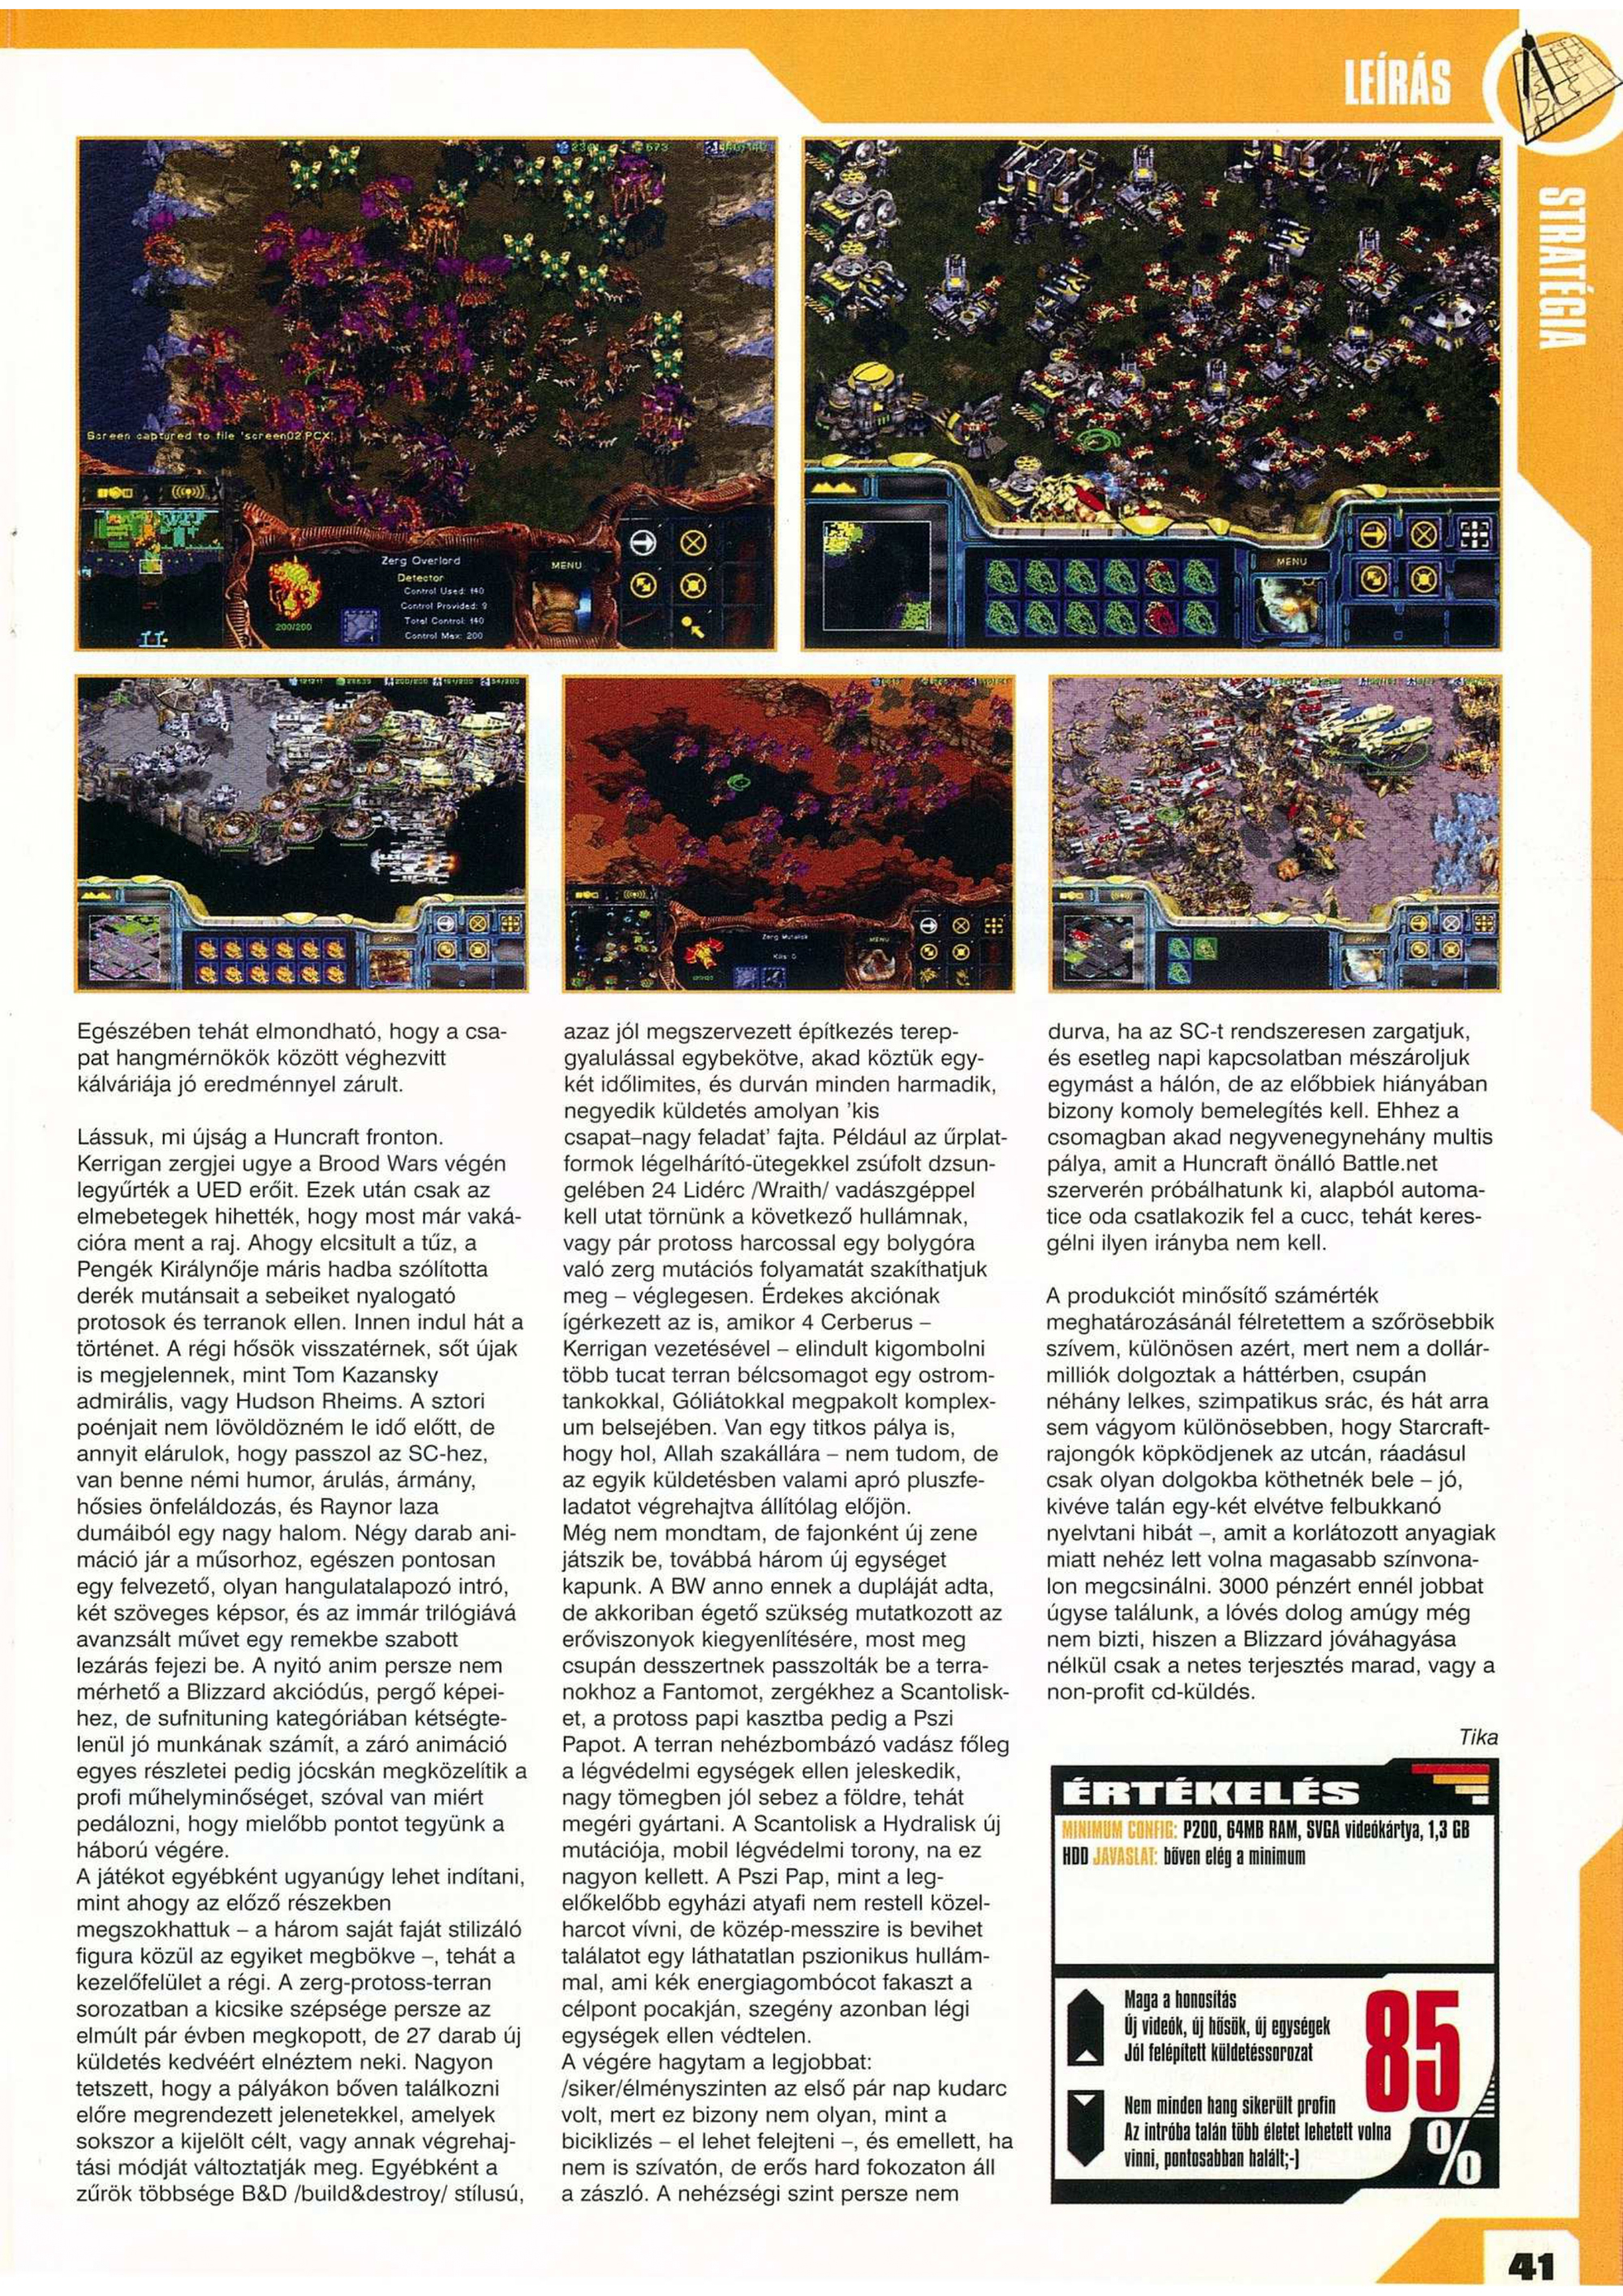 pcgames 2002 03 page 41 4mb